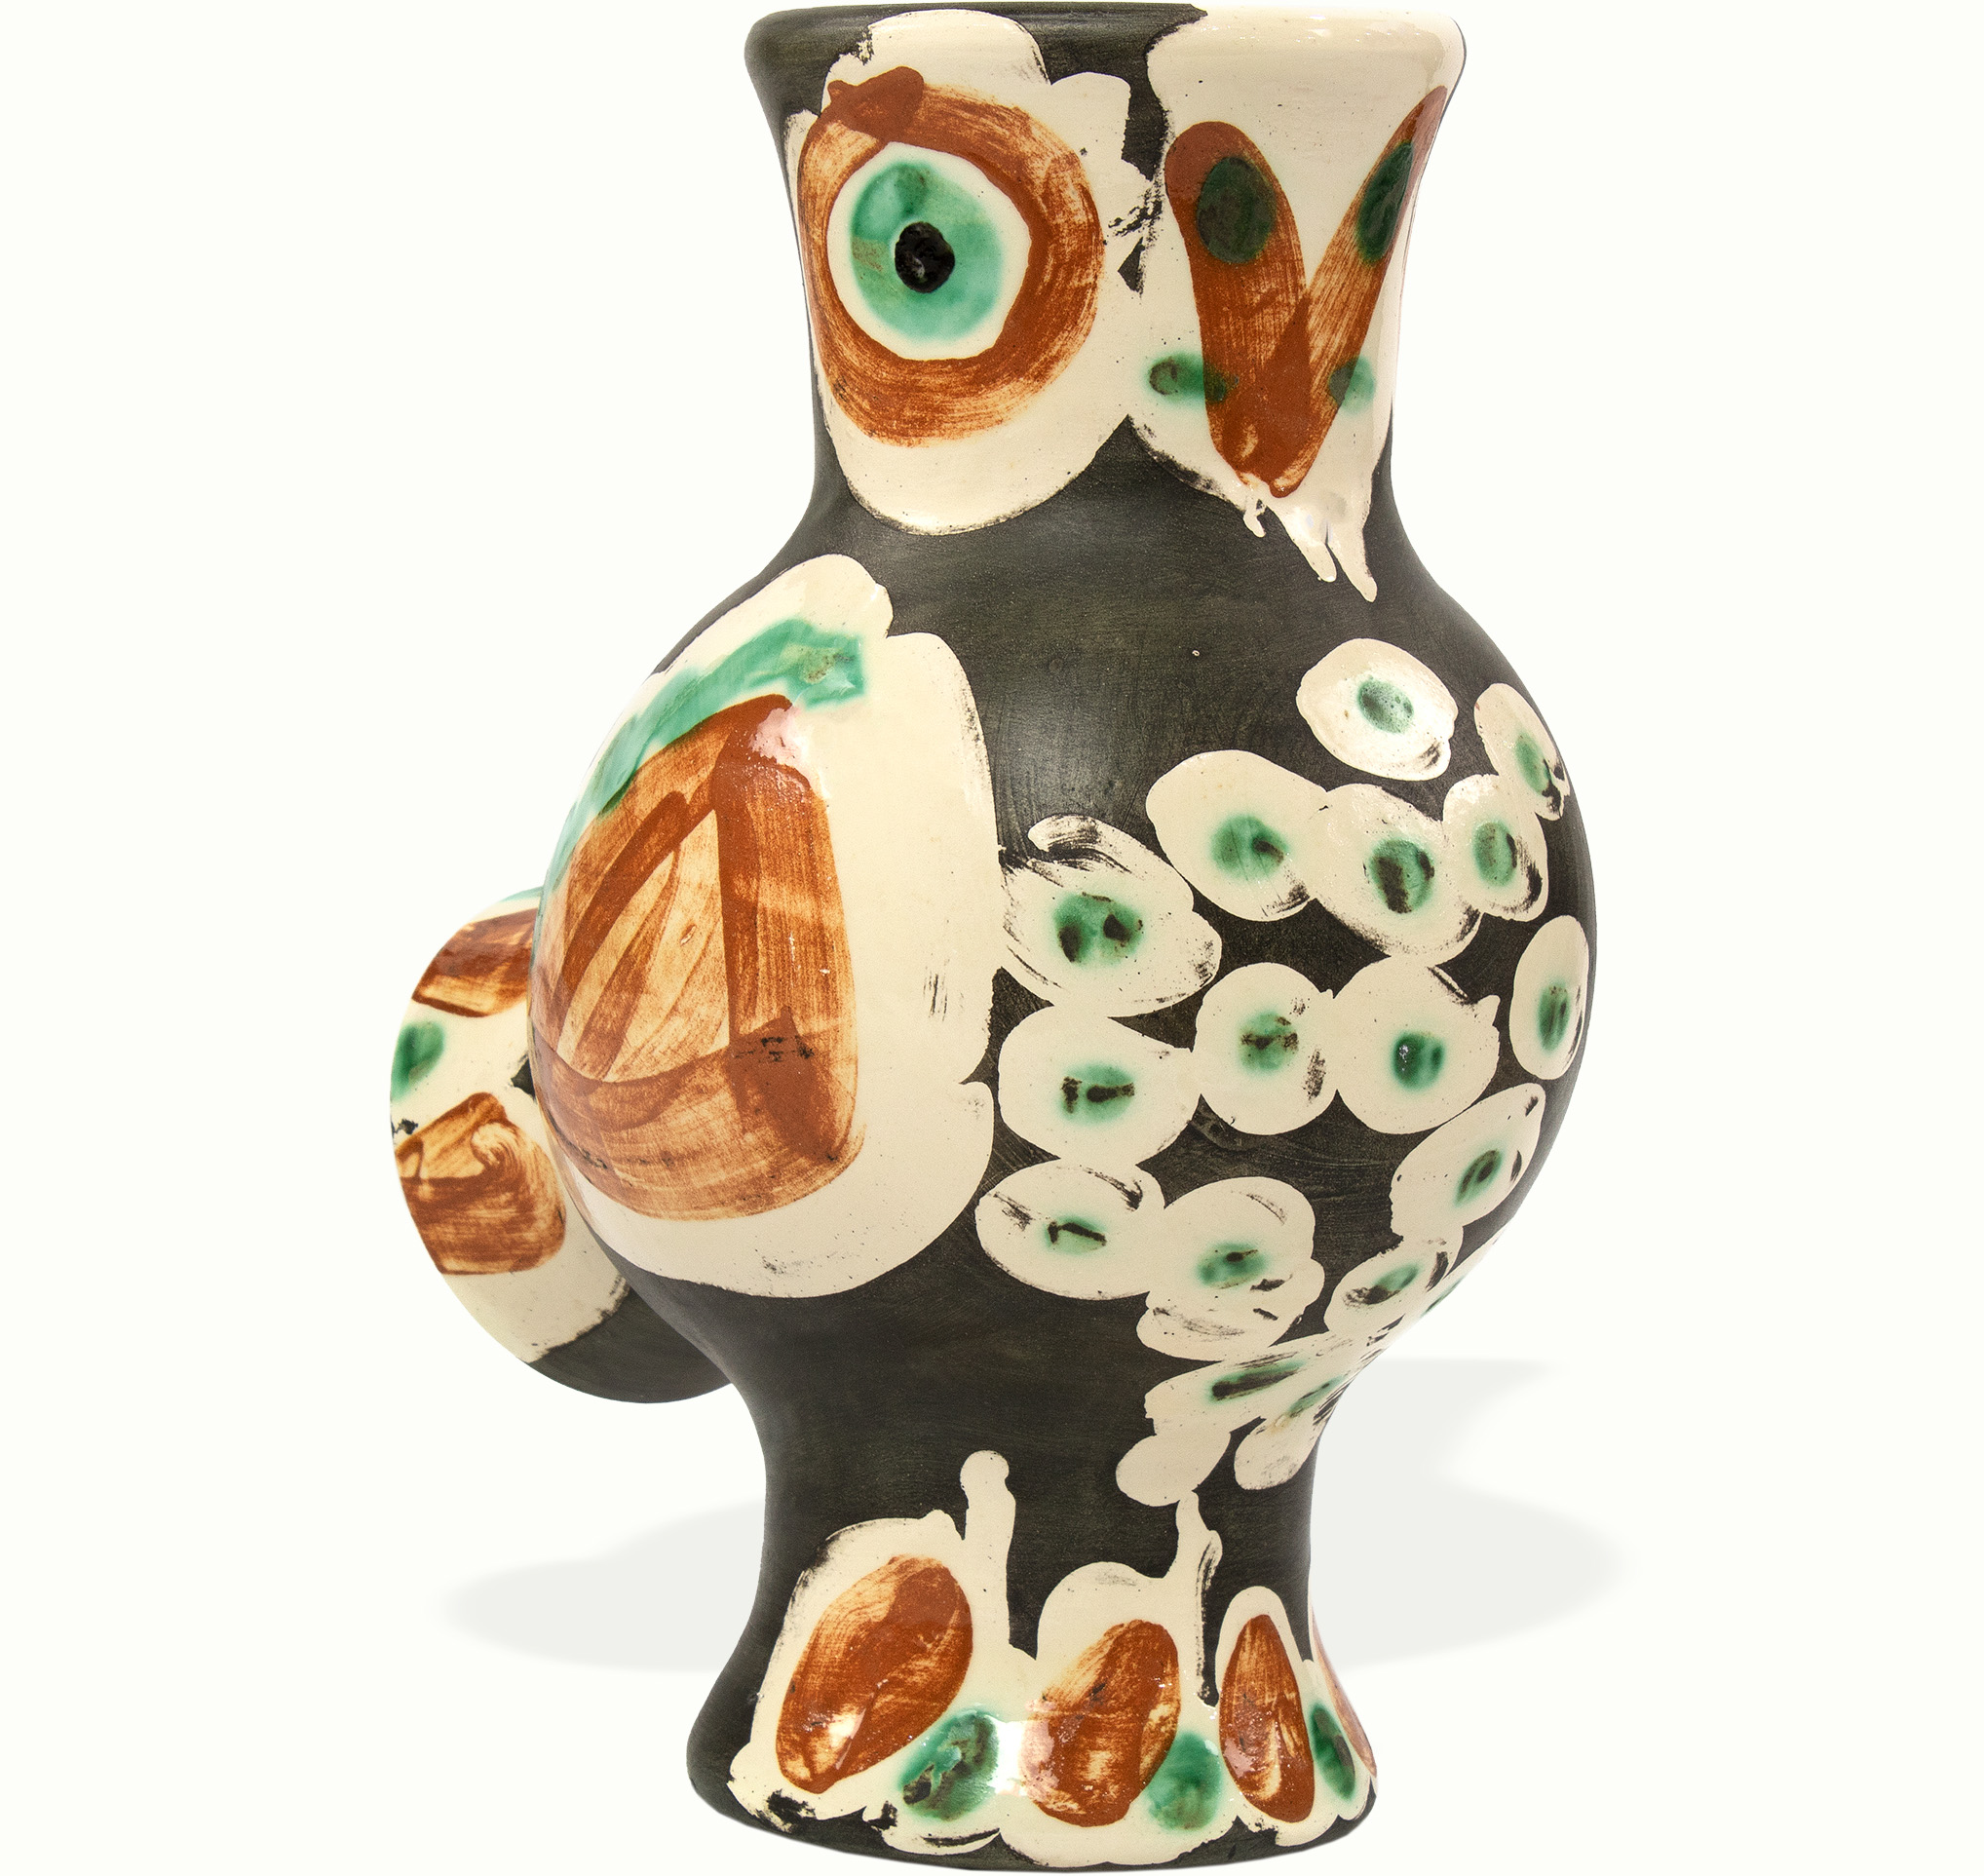 Pablo Picasso (Spanish, 1881–1973), Wood-Owl (Hibou des bois), 1968, partially glazed white earthenware pitcher painted in colors, 11.5″h x 8.5″w x 6″d.